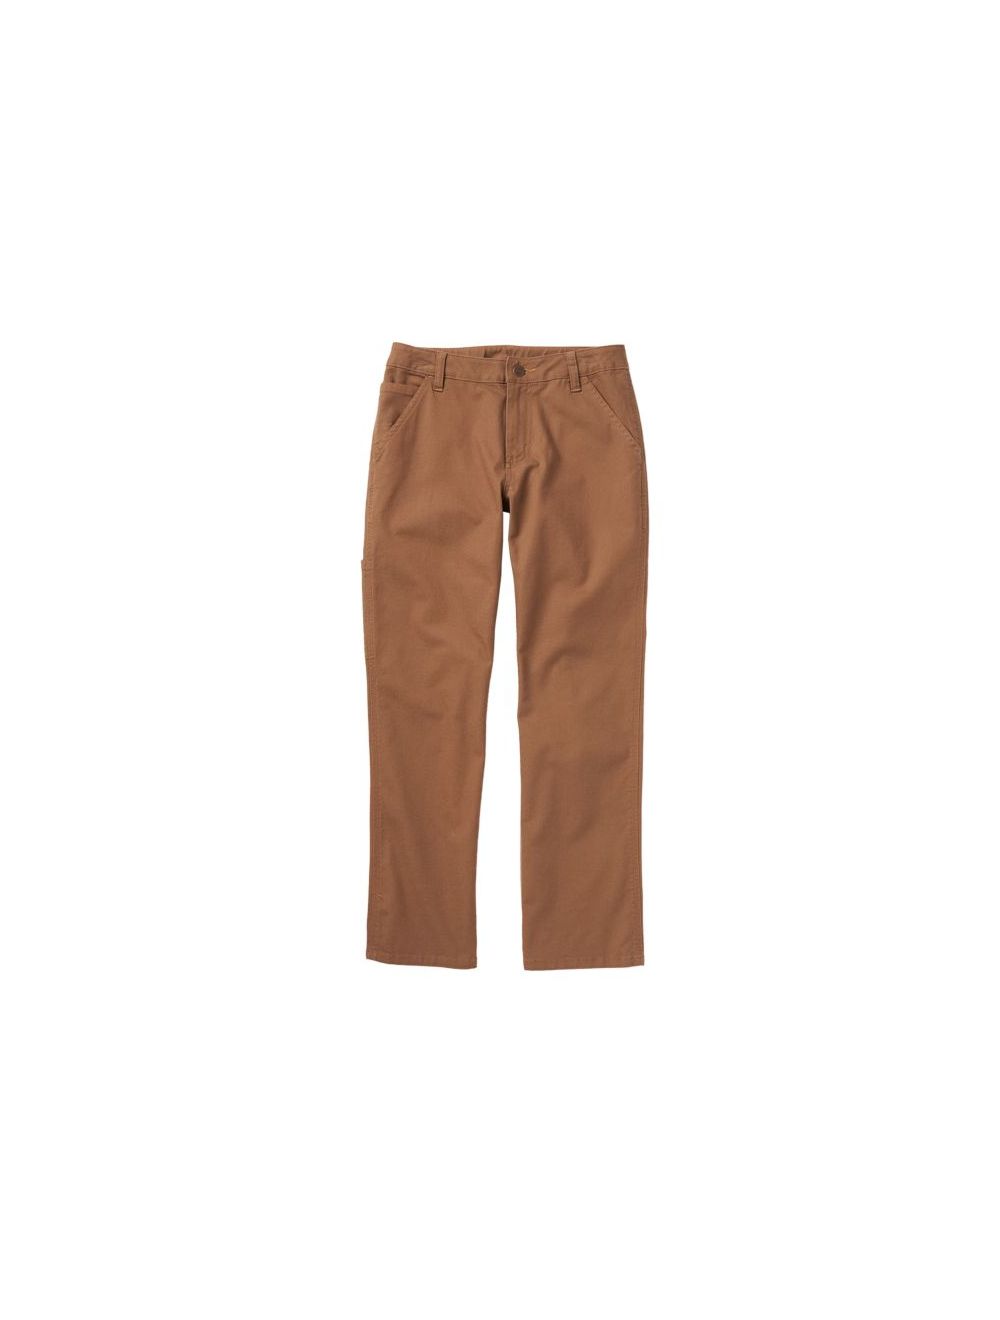 Carhartt Women's Rugged Flex Loose Fit Canvas Work Pants - Country Outfitter